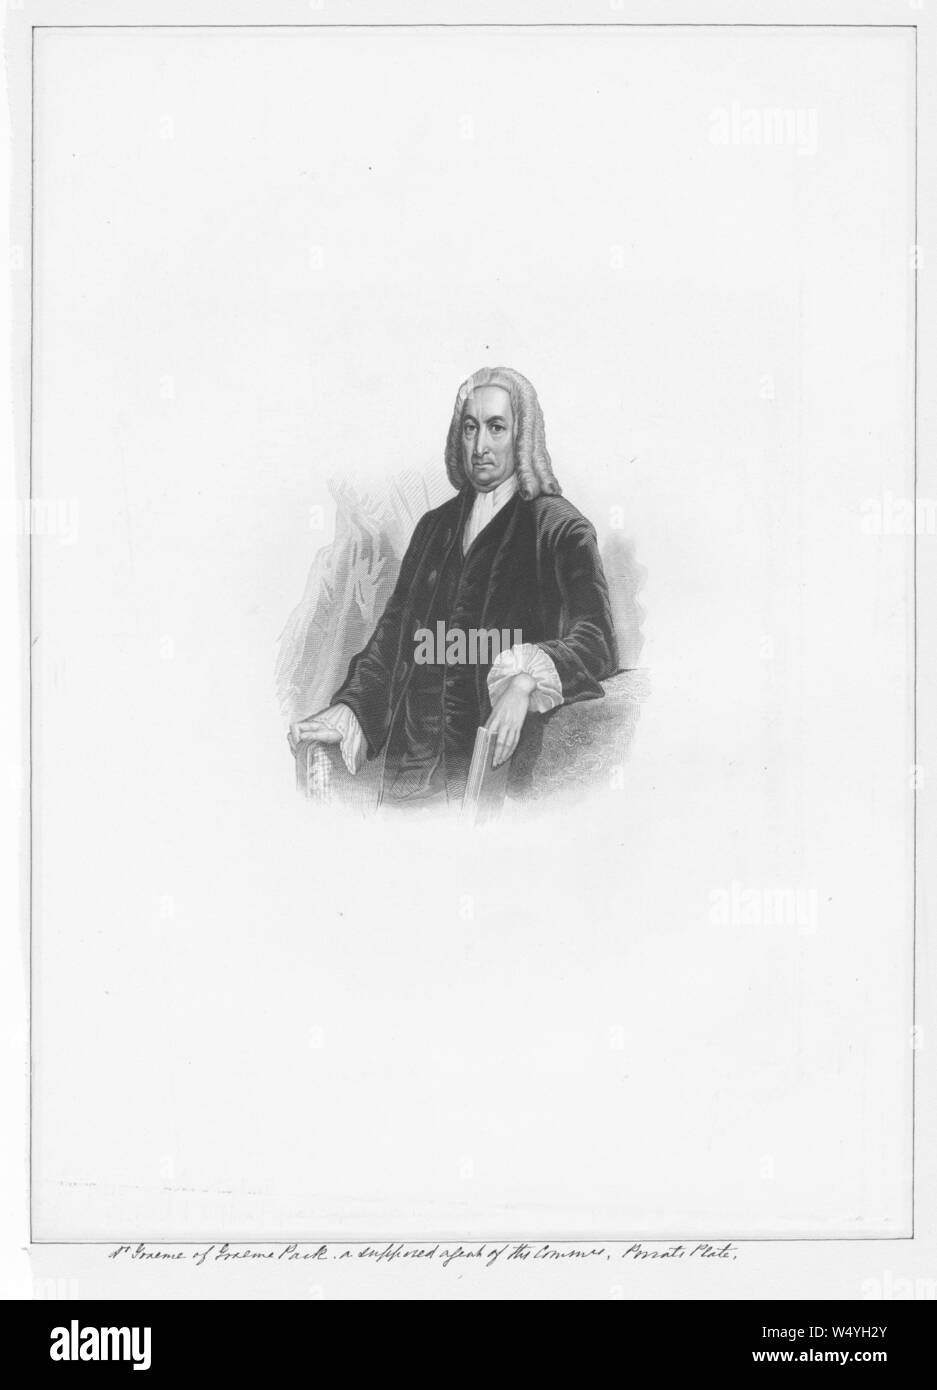 Engraved portrait of Thomas Graeme of Graeme Park, Samuel Putnam Avery collection, illustrated by Felix Henri Bracquemond, 1850. From the New York Public Library. () Stock Photo